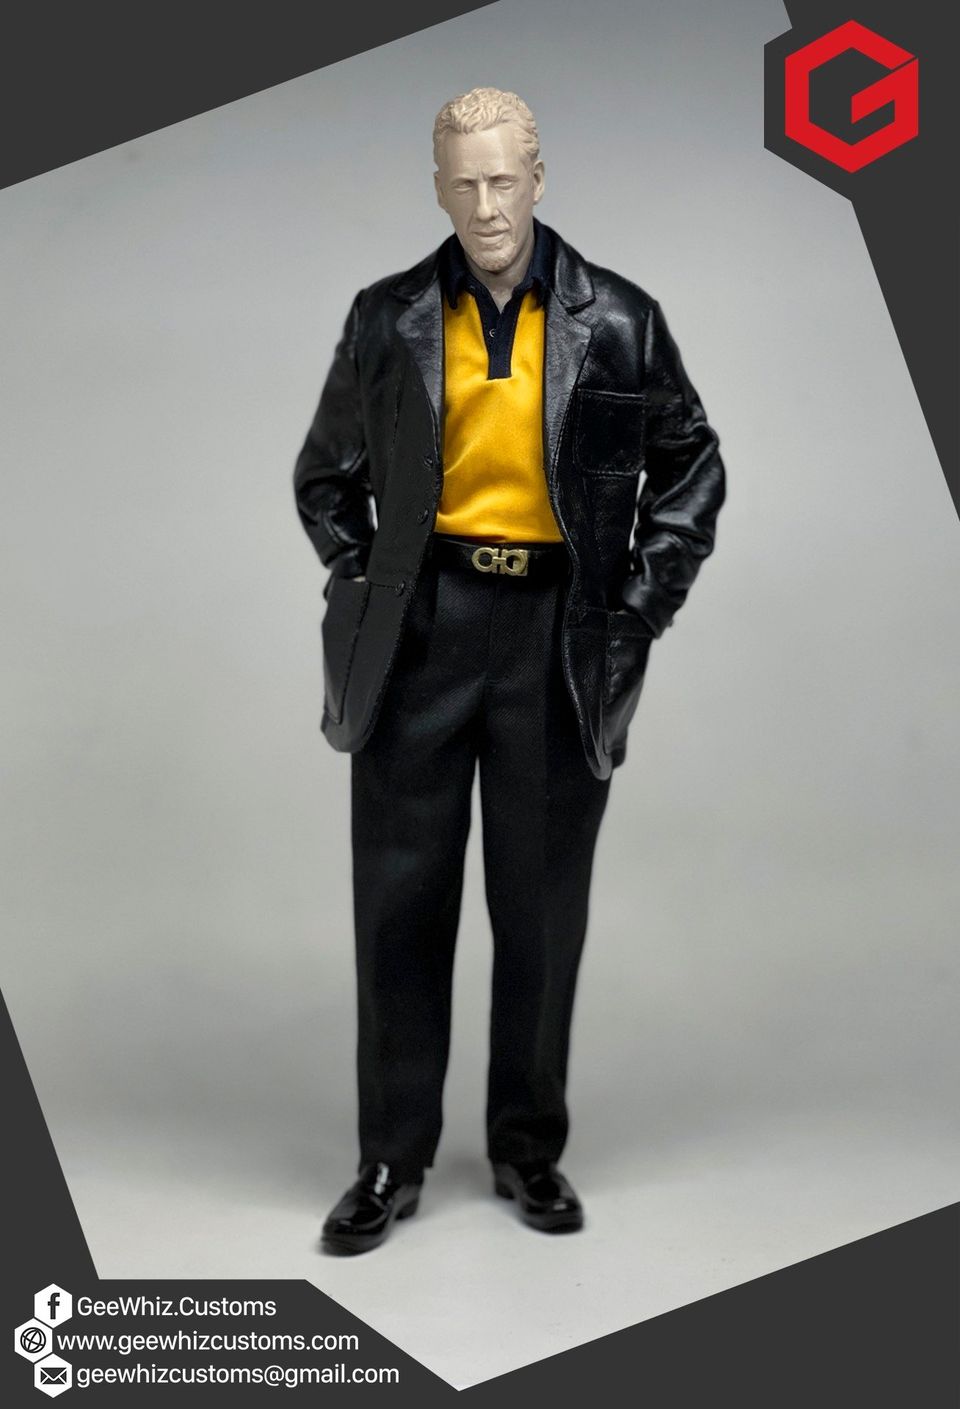 Geewhiz Customs: Tailored the outfit for this private commission for a 1:6  Scale